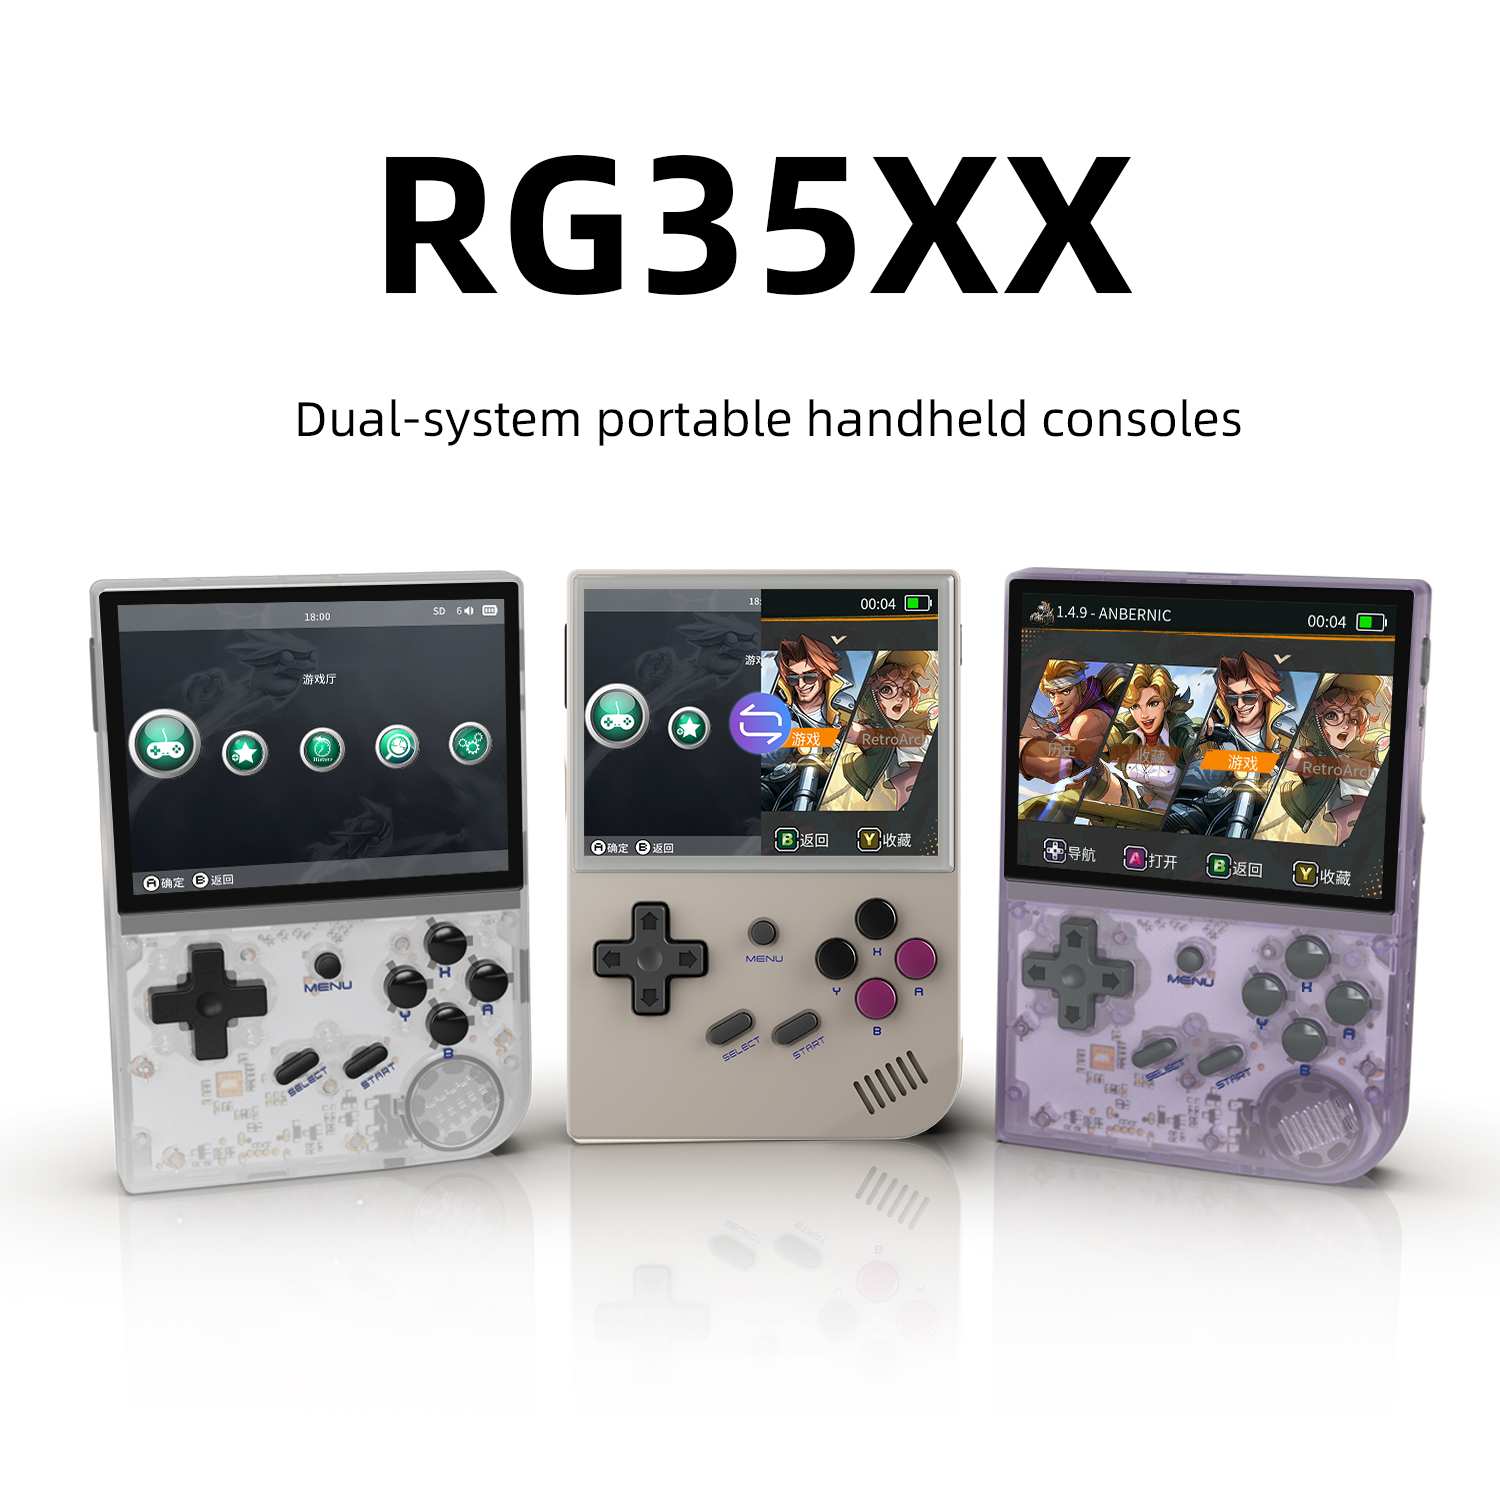 ANBERNIC RG35XX PLUS Handheld Game Console 3.5-Inch IPS Screen Support HDMI  TV 64GB(Transparent Black)